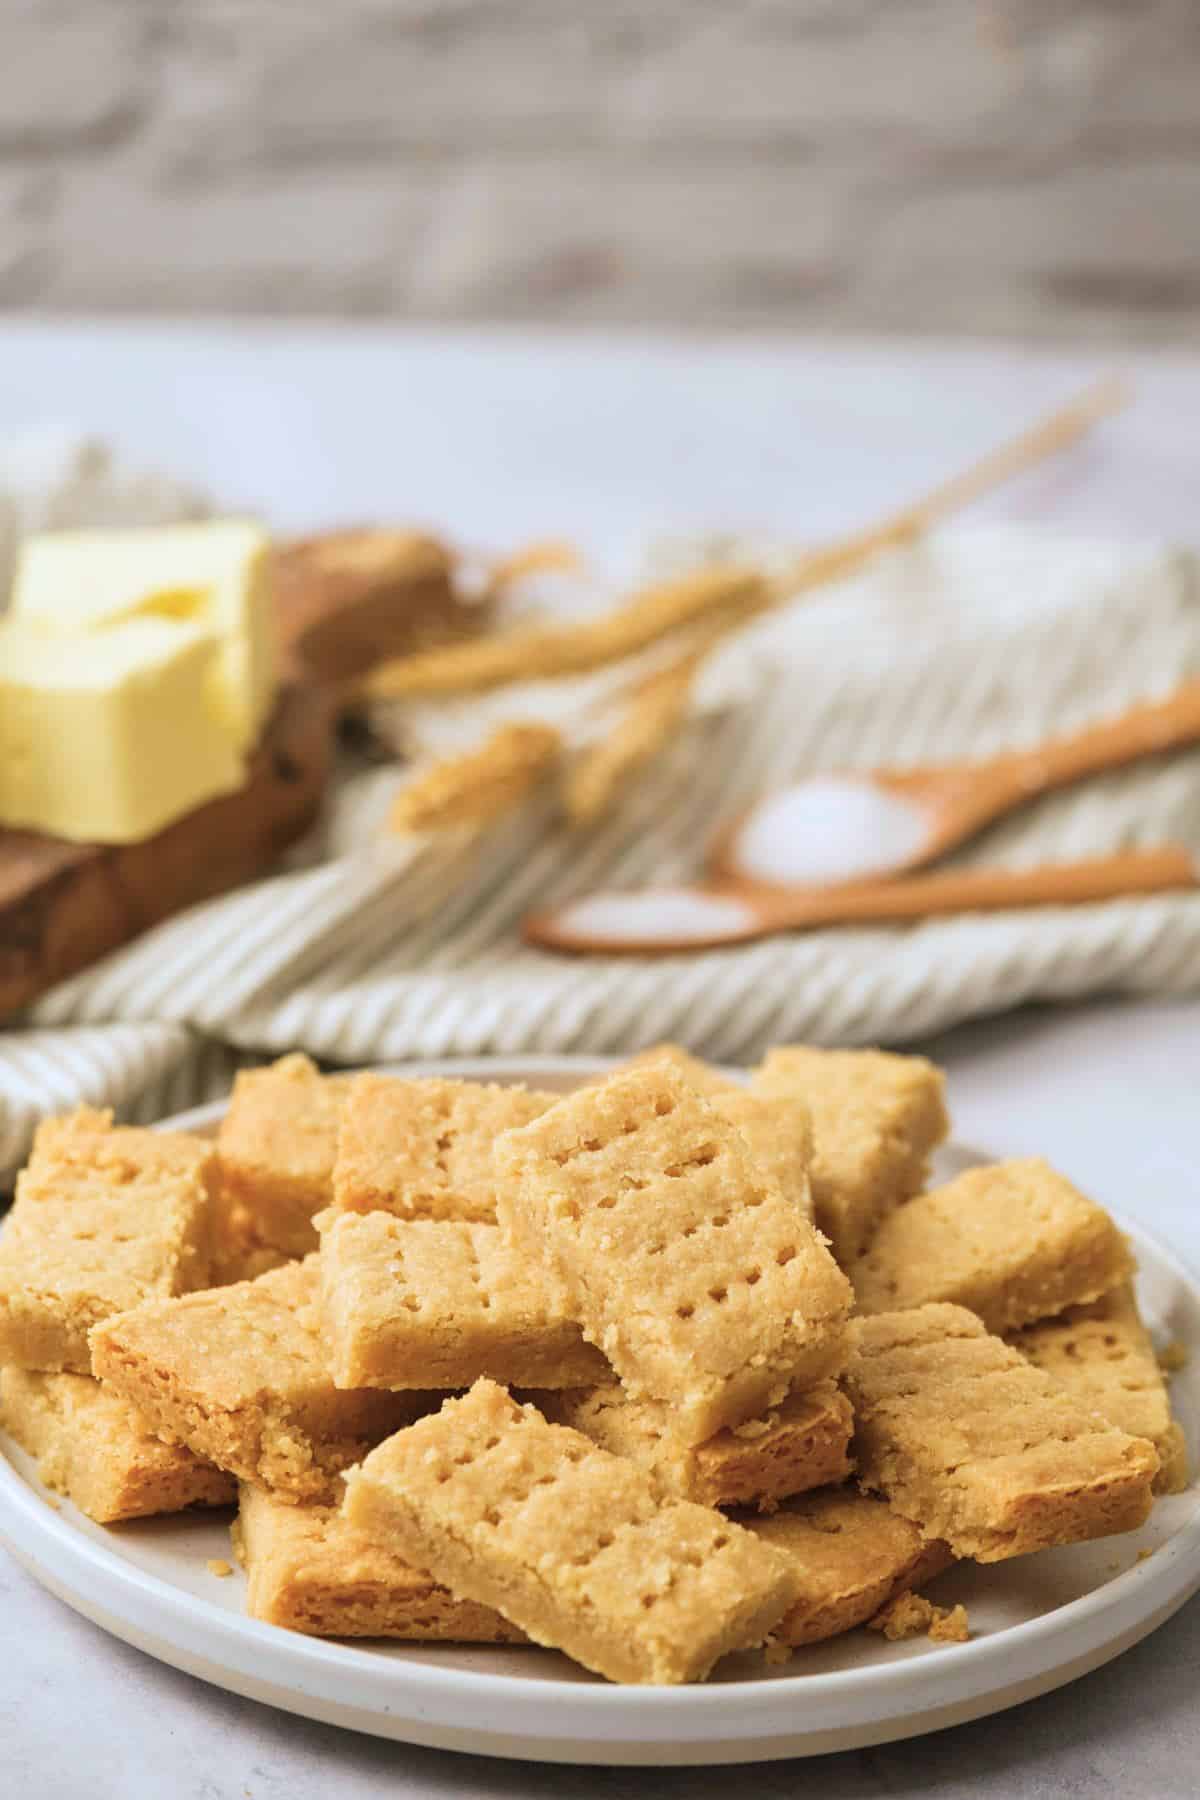 A plate filled with shortbread fingers, light and golden brown.